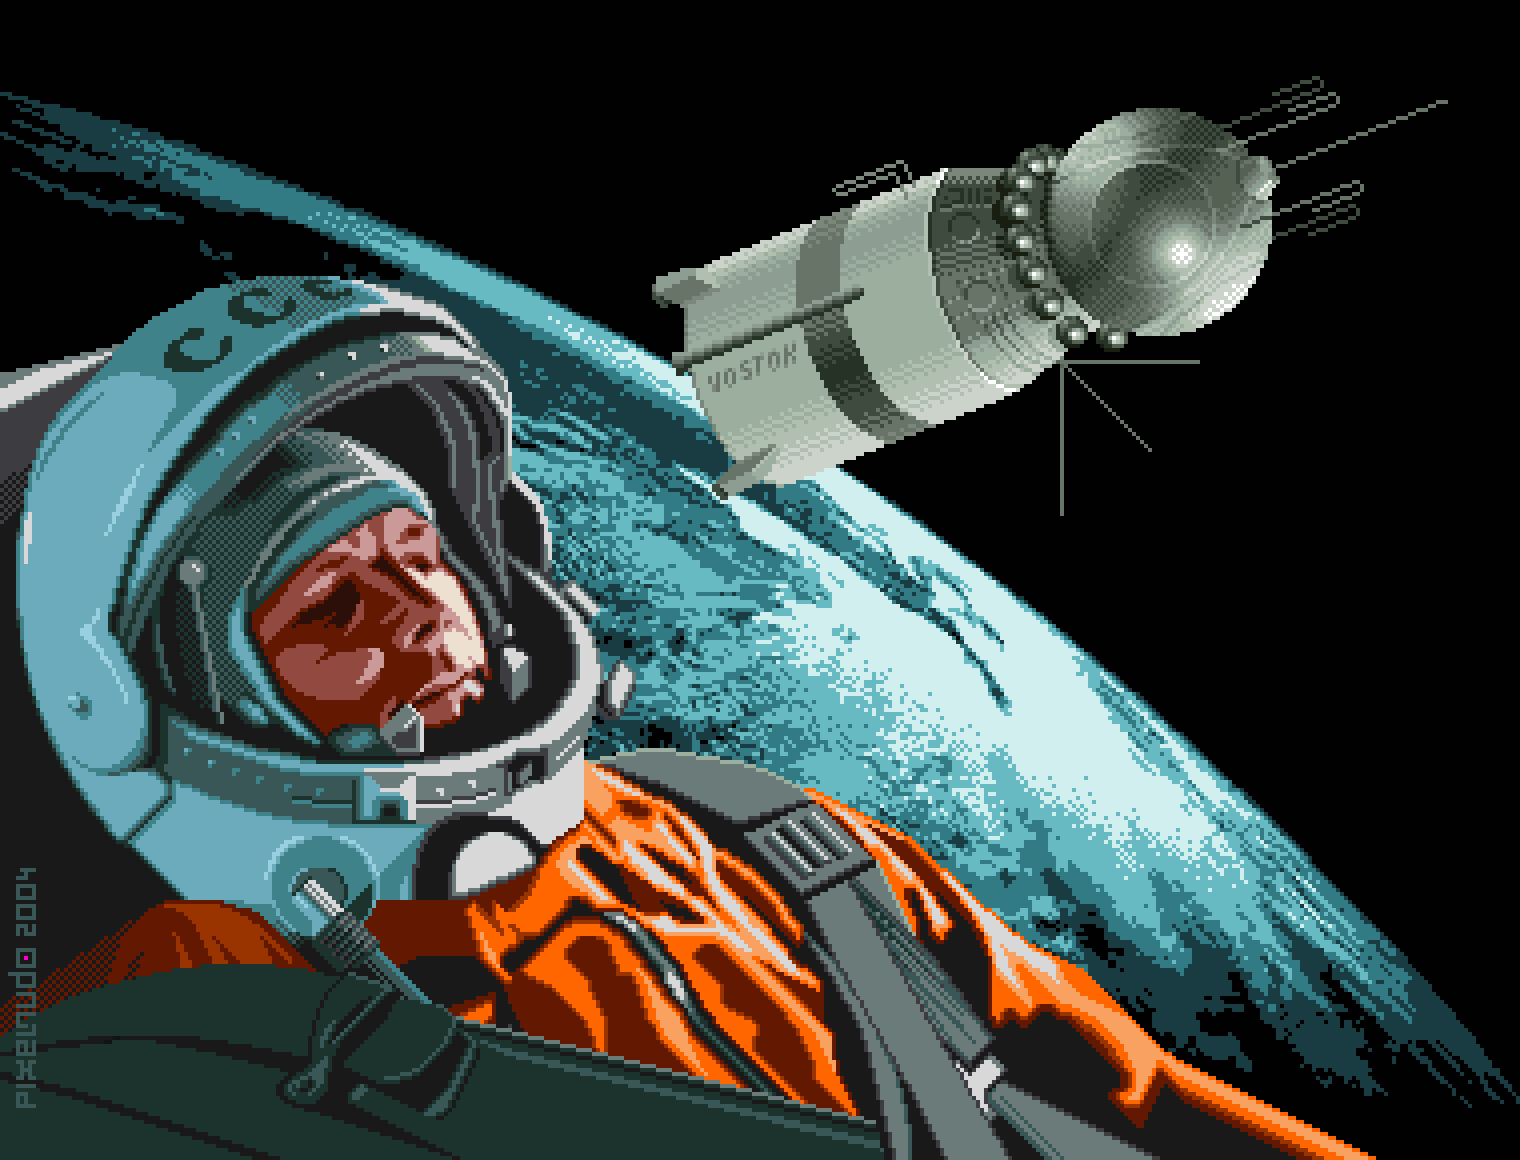 Yuri Gagarin: 12 April 1961, first human to journey into outer space